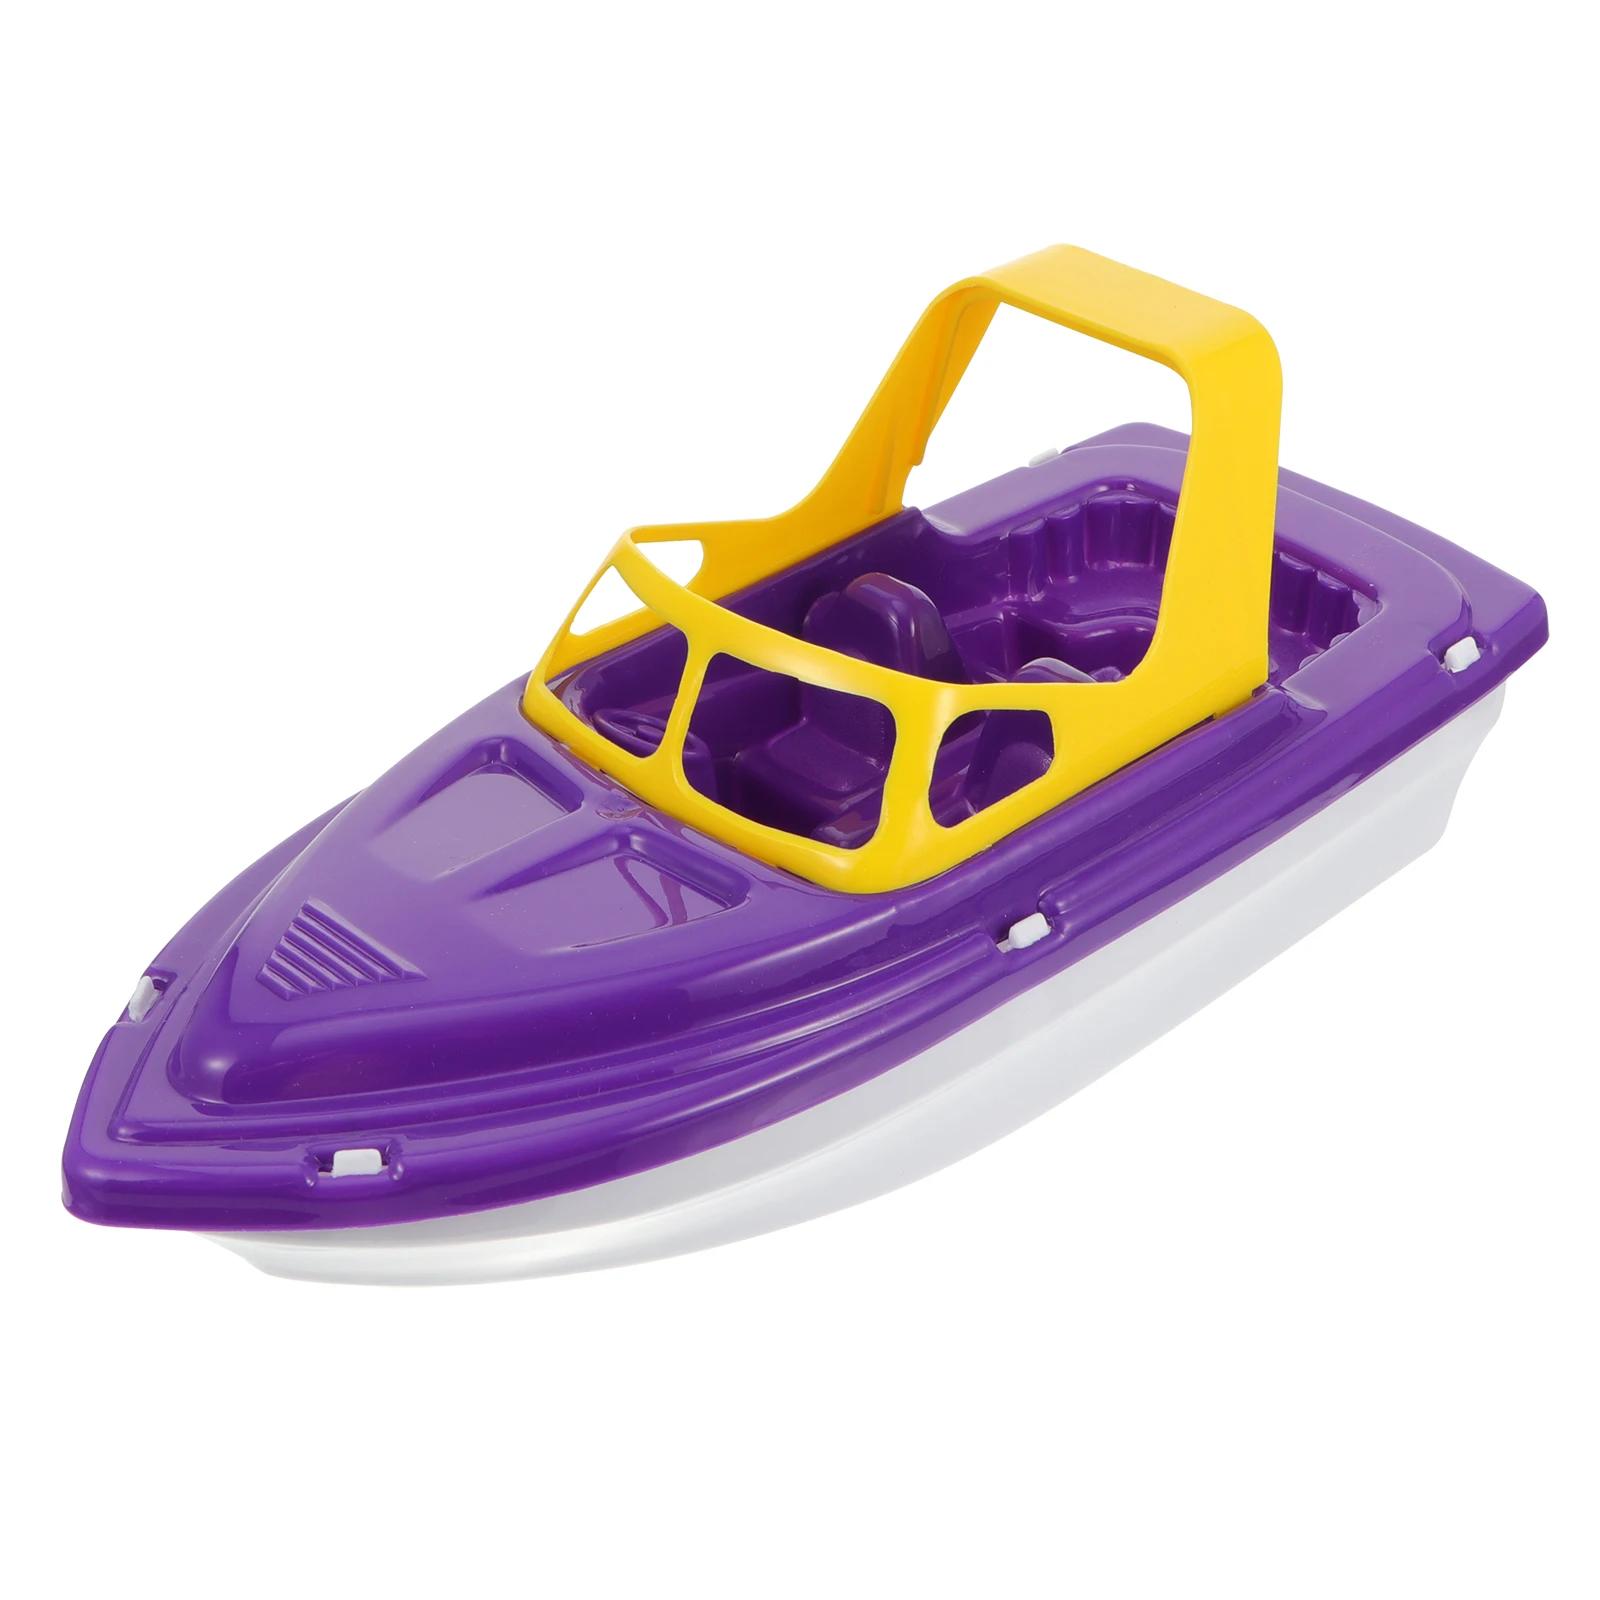 Toys Toy Boat Bathpool Boats Kids Beachbathtub Baby Floating Water Toddler - £12.46 GBP